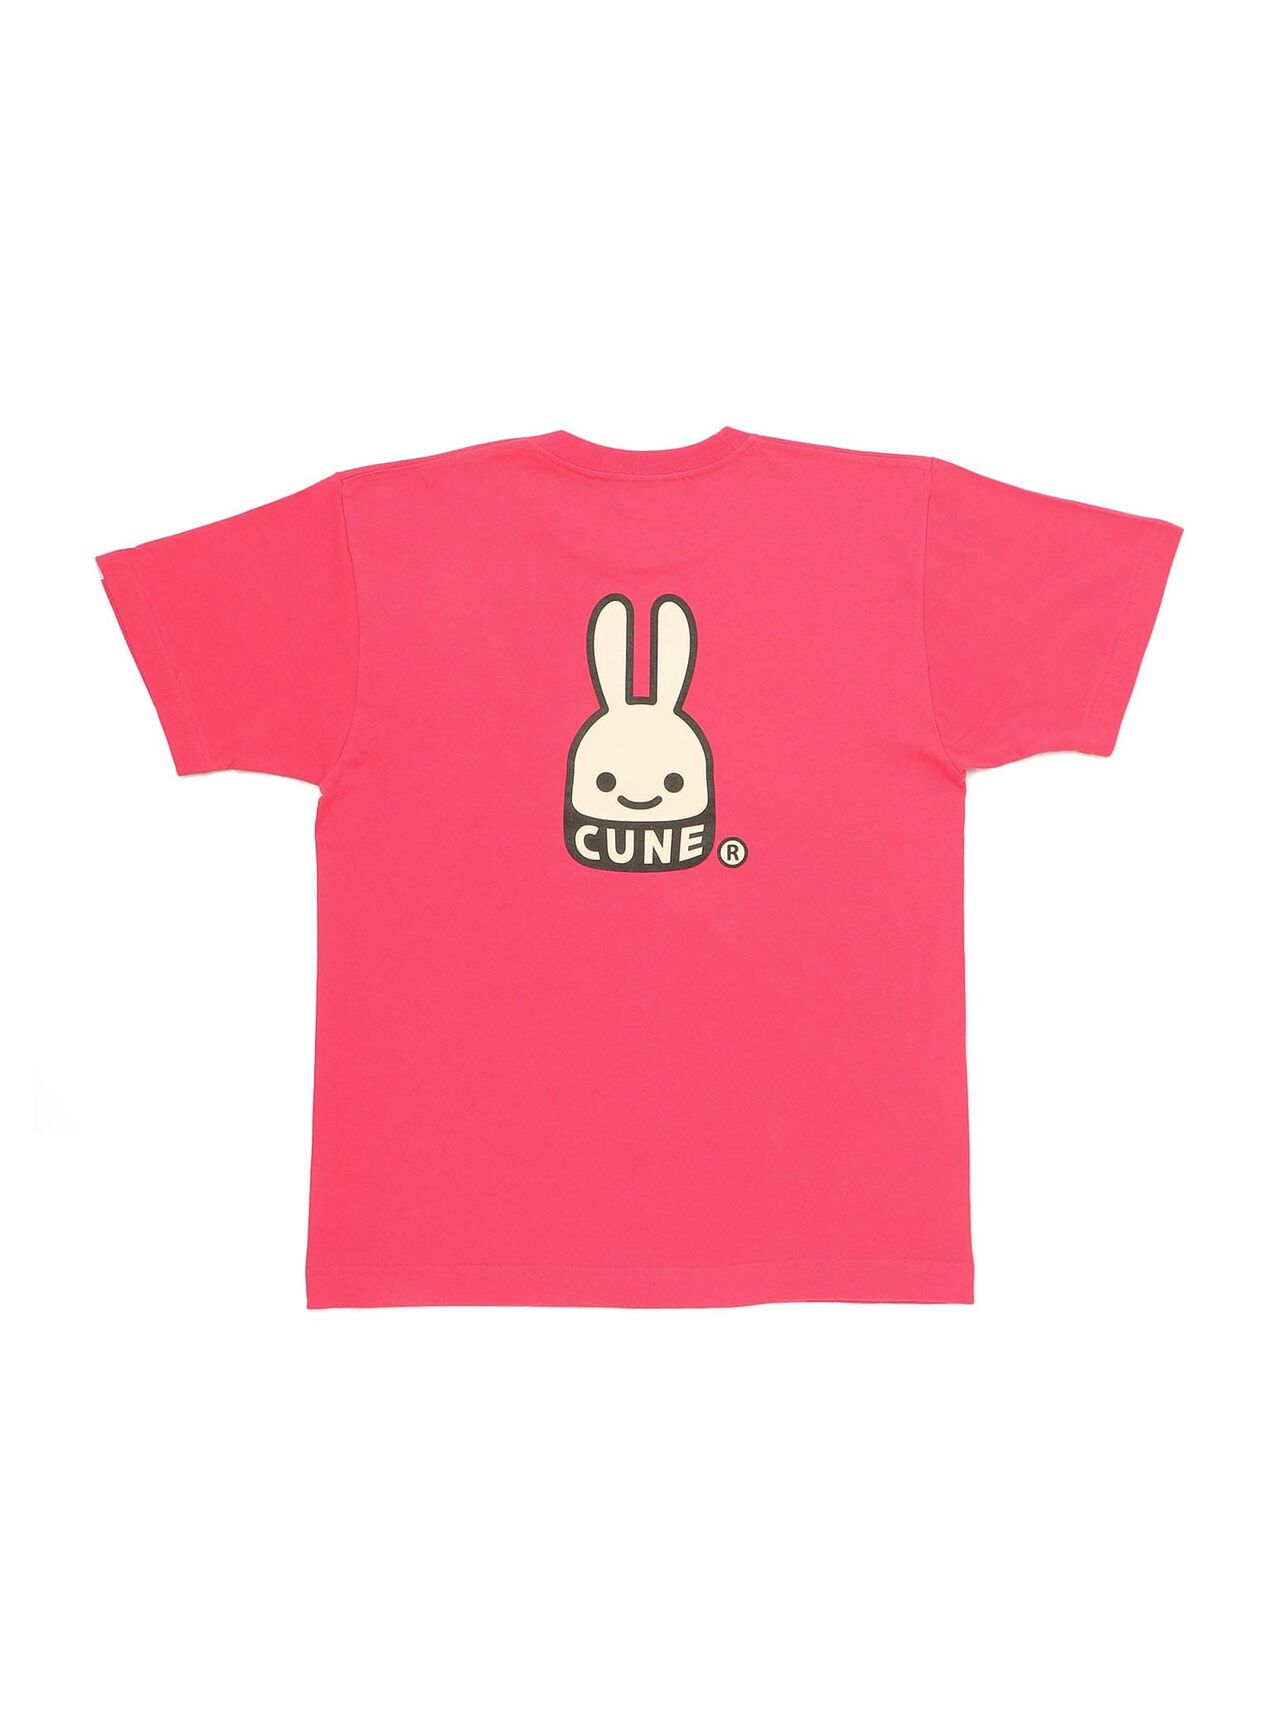 S/S Tee CUNE Rabbit,L, large image number 7